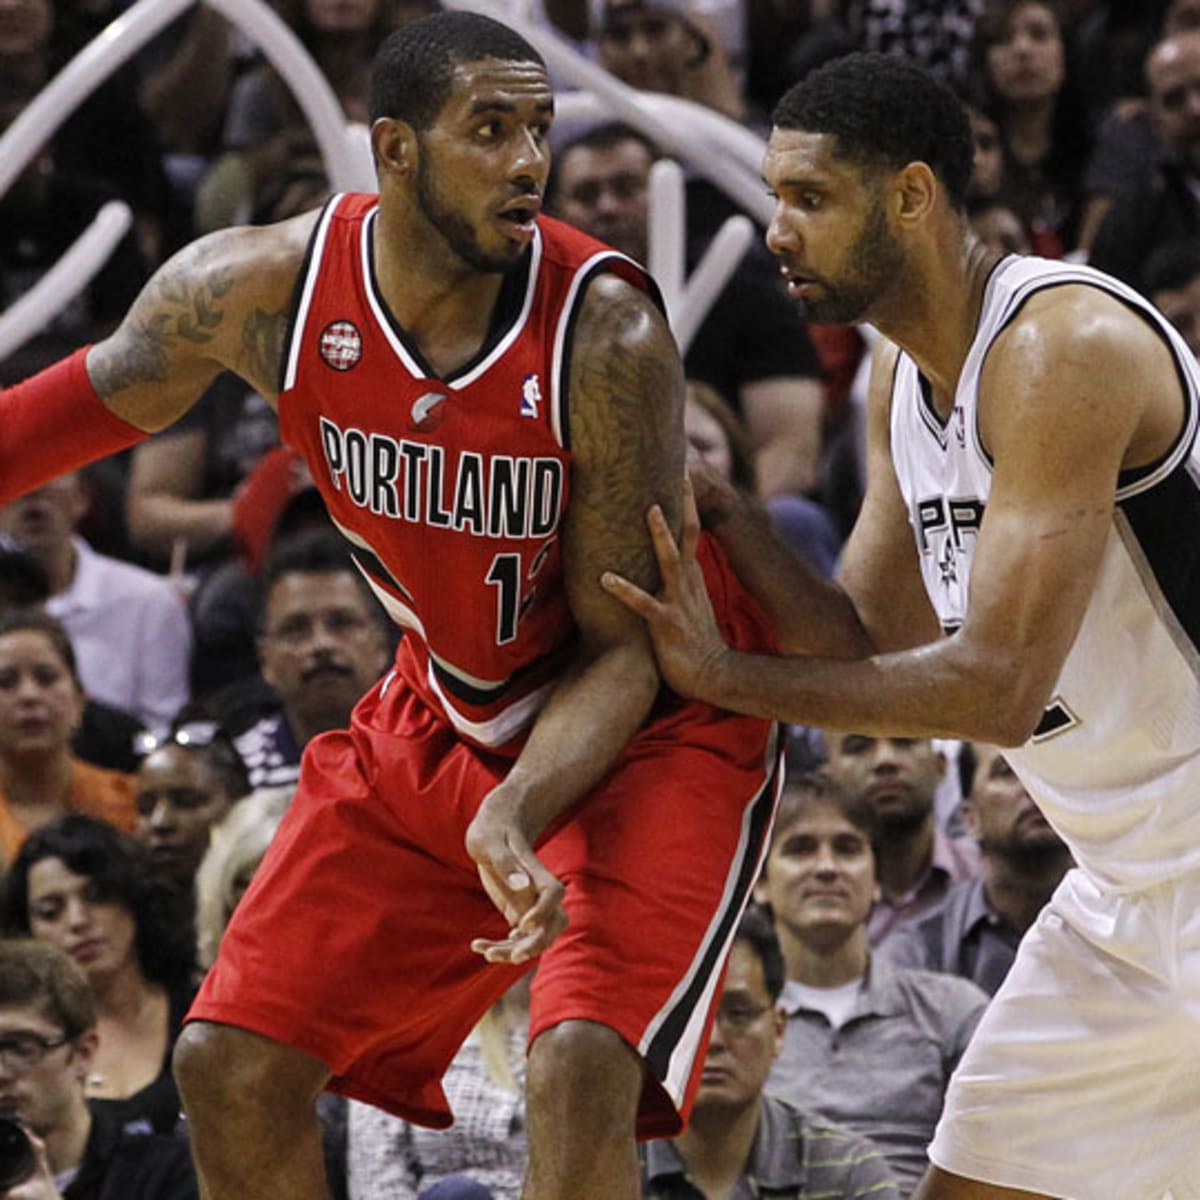 LaMarcus Aldridge's signing with Spurs helped keep championship core intact  - Los Angeles Times